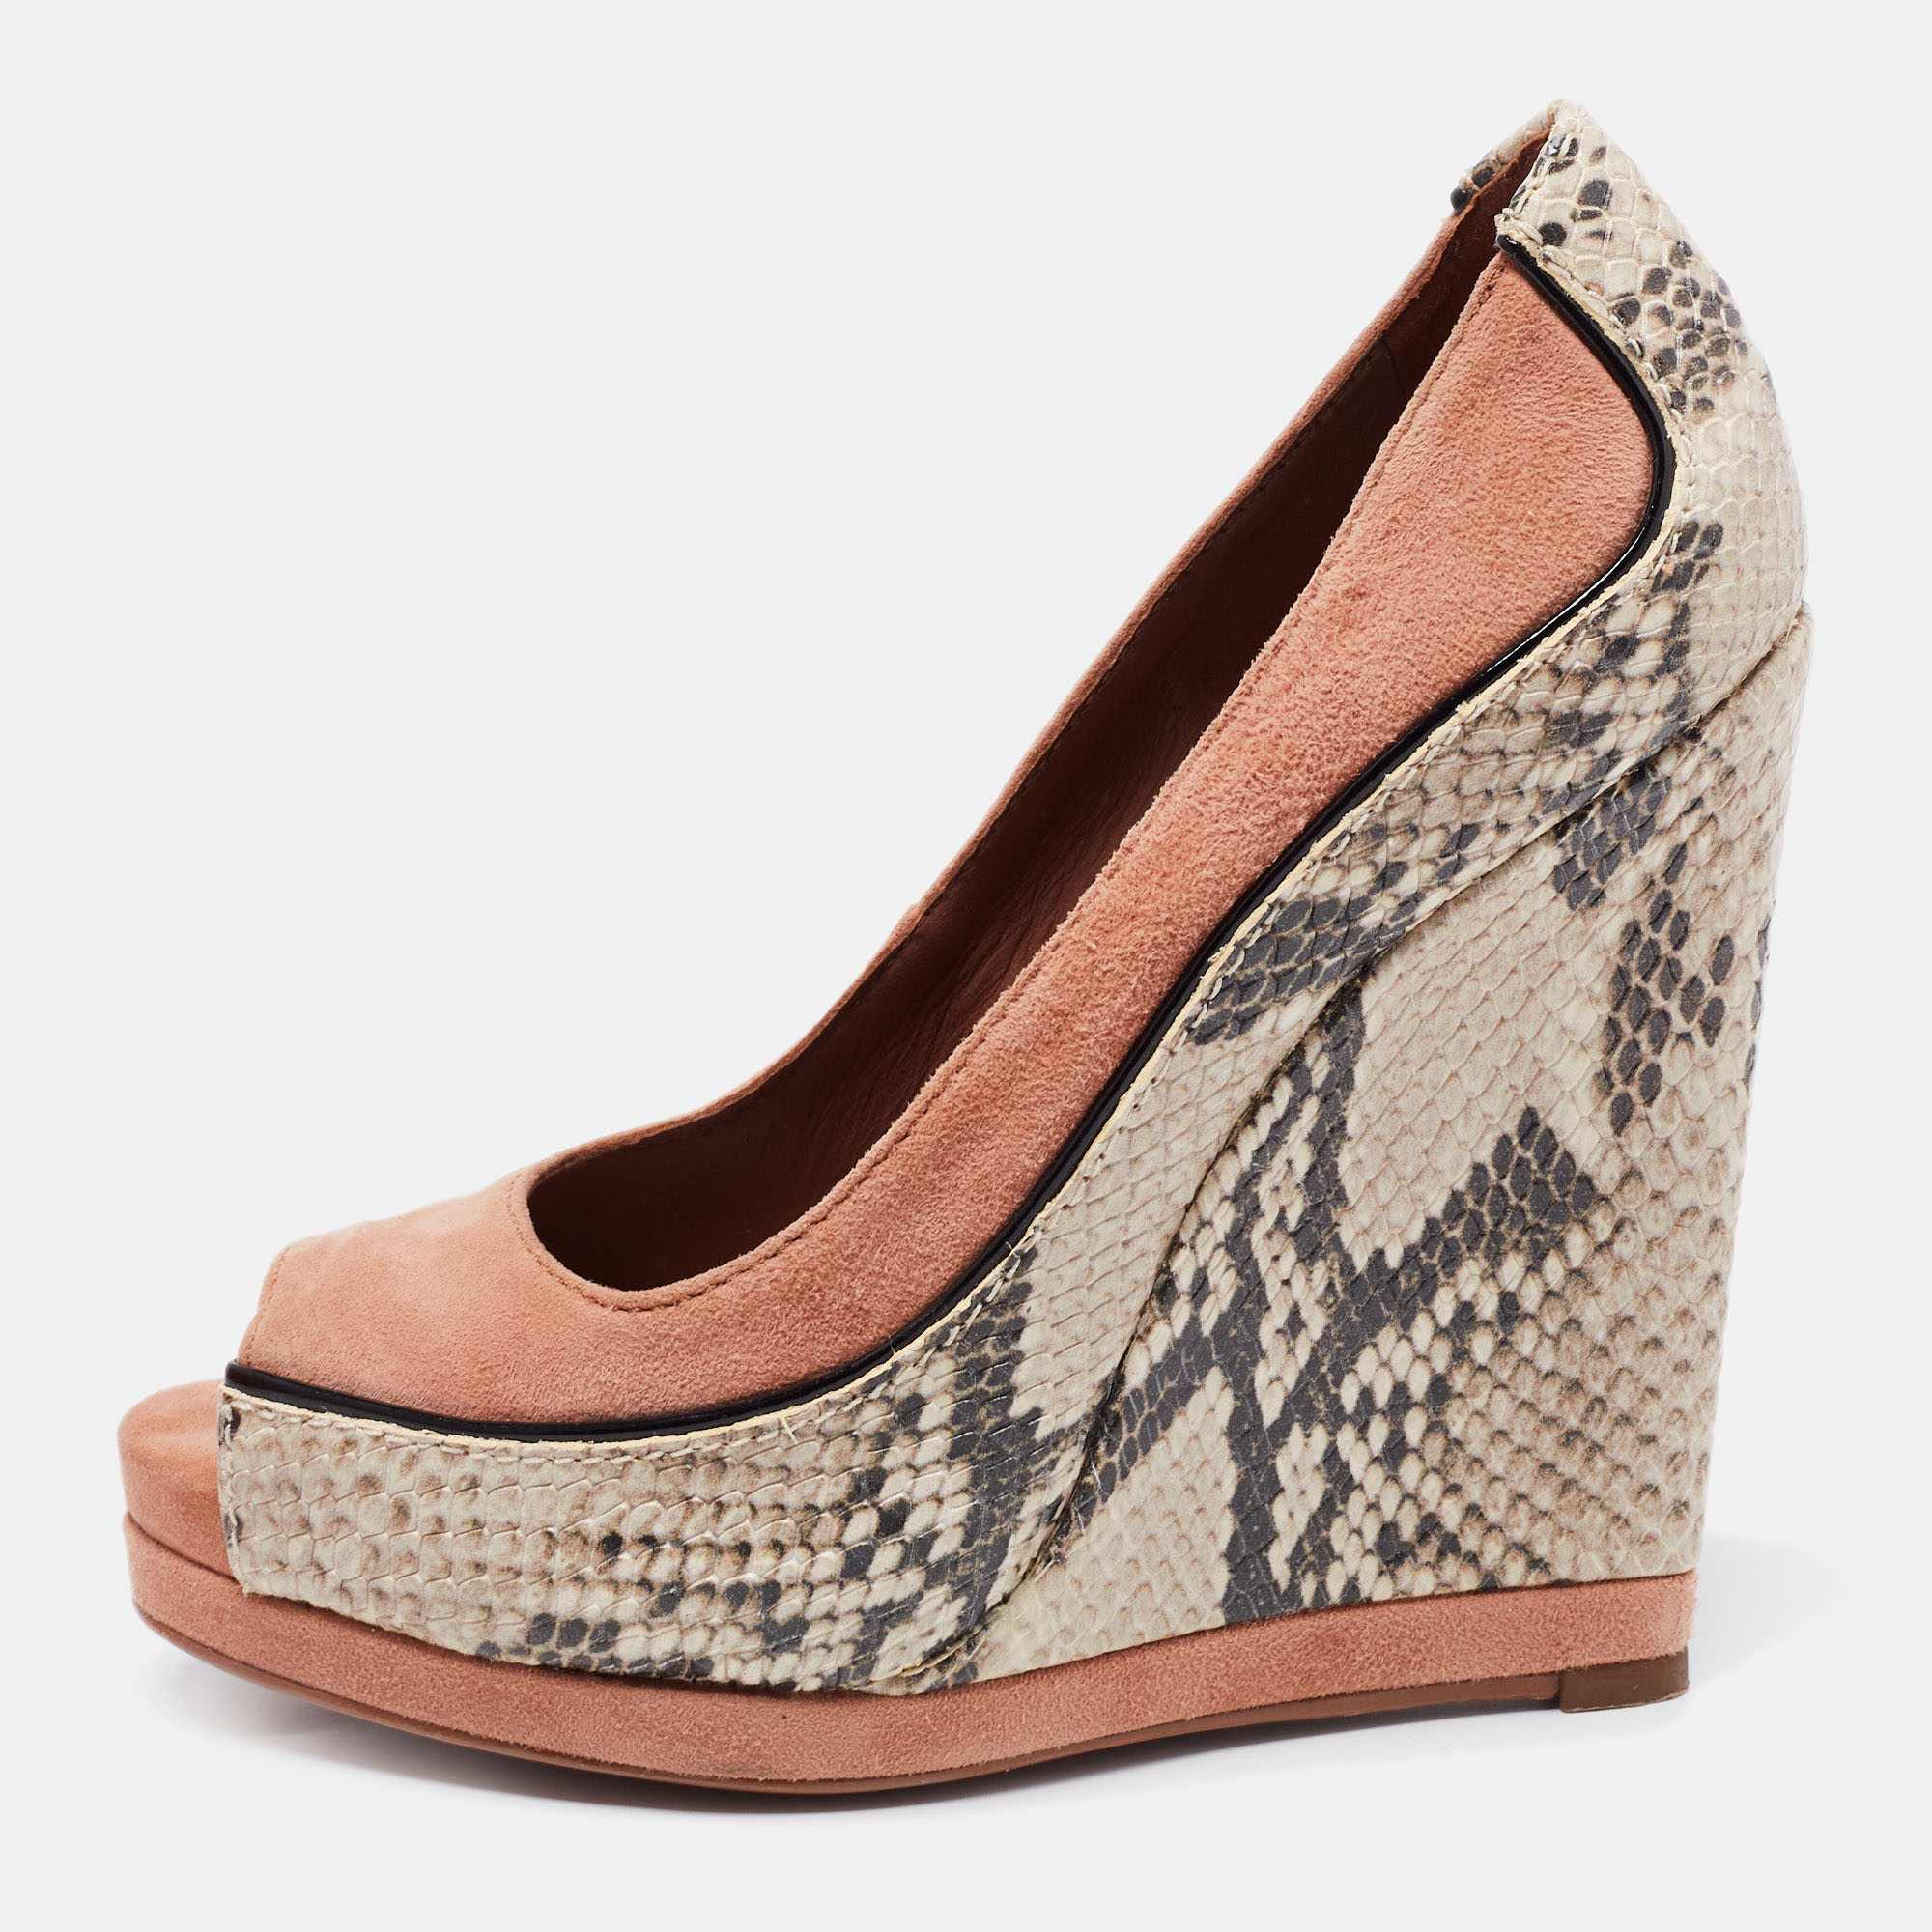 Pre-owned Tory Burch Beige Suede And Python Embossed Leather Sandra Wedge Platform Pumps Size 35